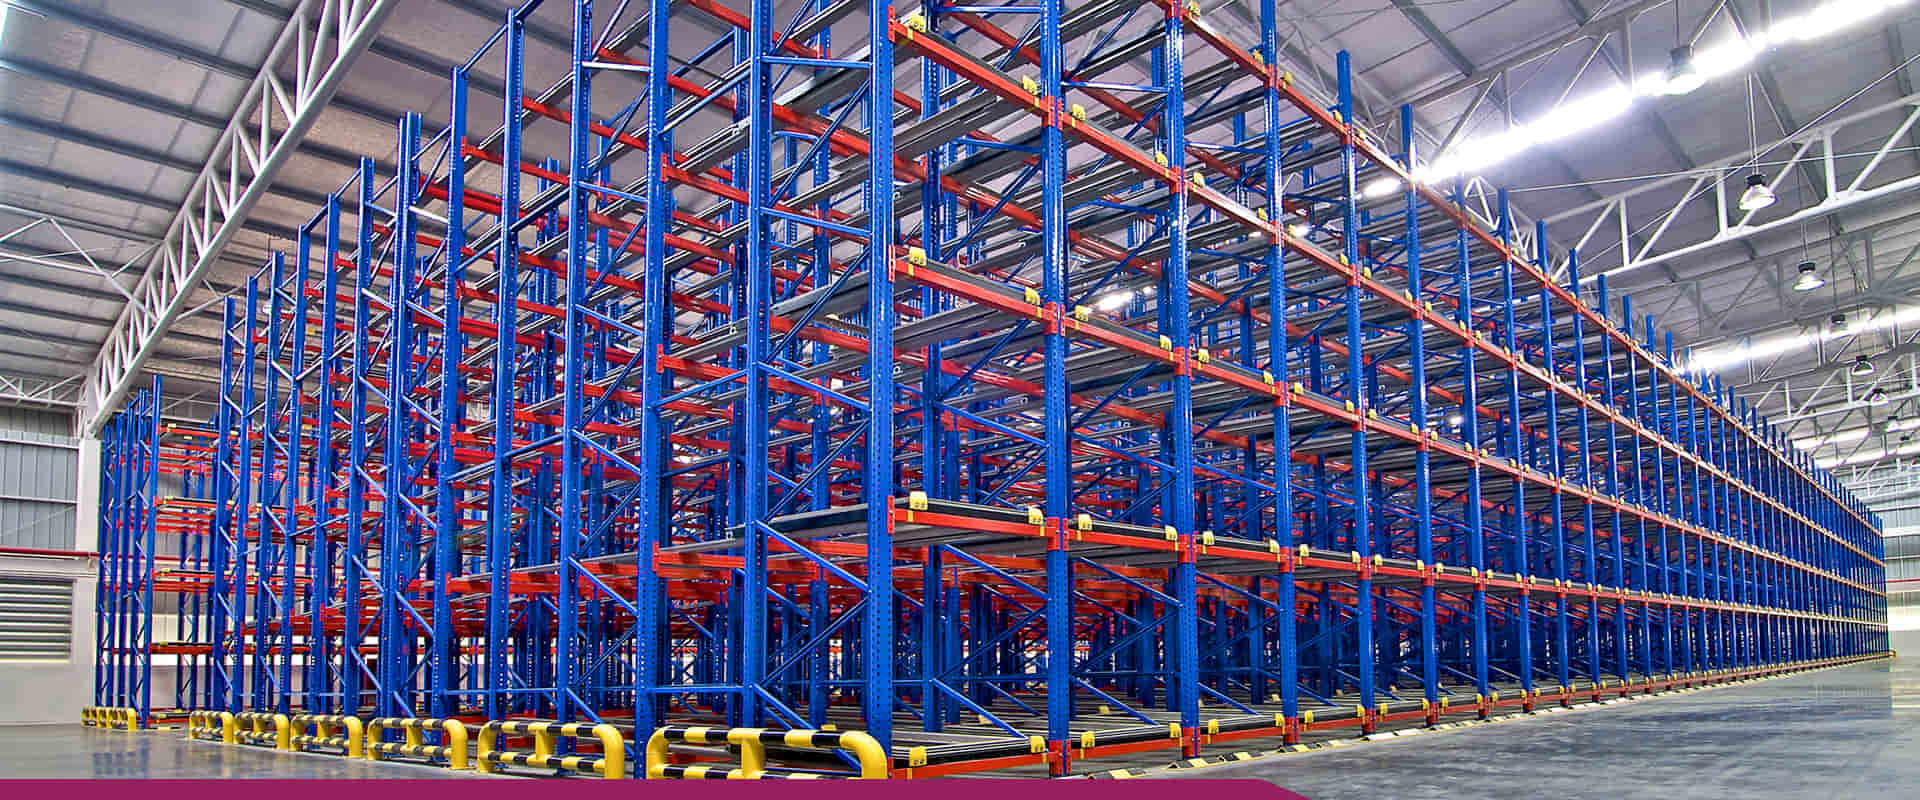 India’s Top Warehouse And Industrial Storage Racks Manufacturer In Charkhi Dadri